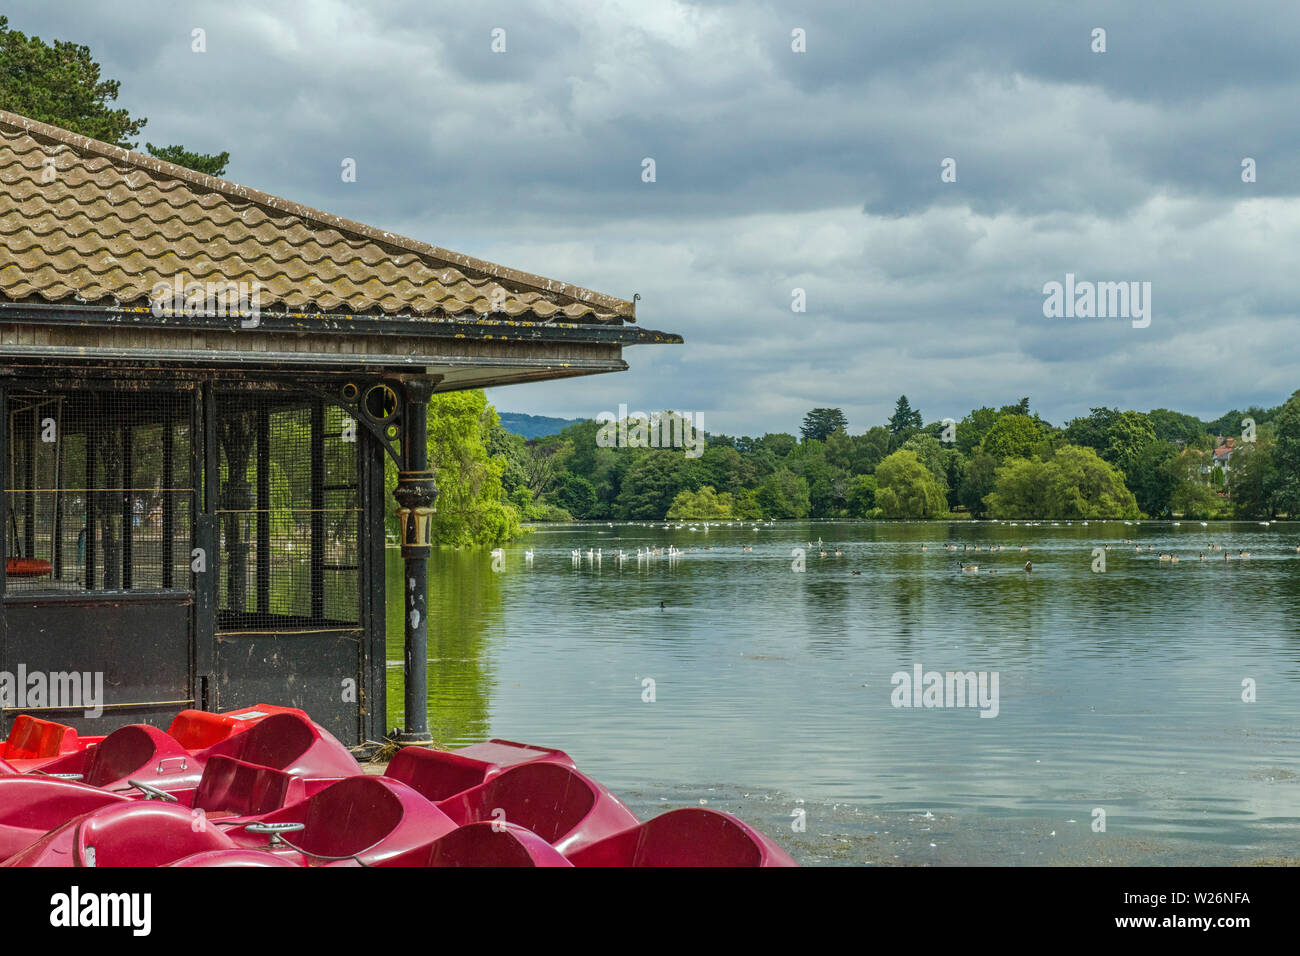 Roath Park Lake in the capital city of Wales, Cardiff, showing the surrounding trees and one of the boathouses, South Wales Stock Photo